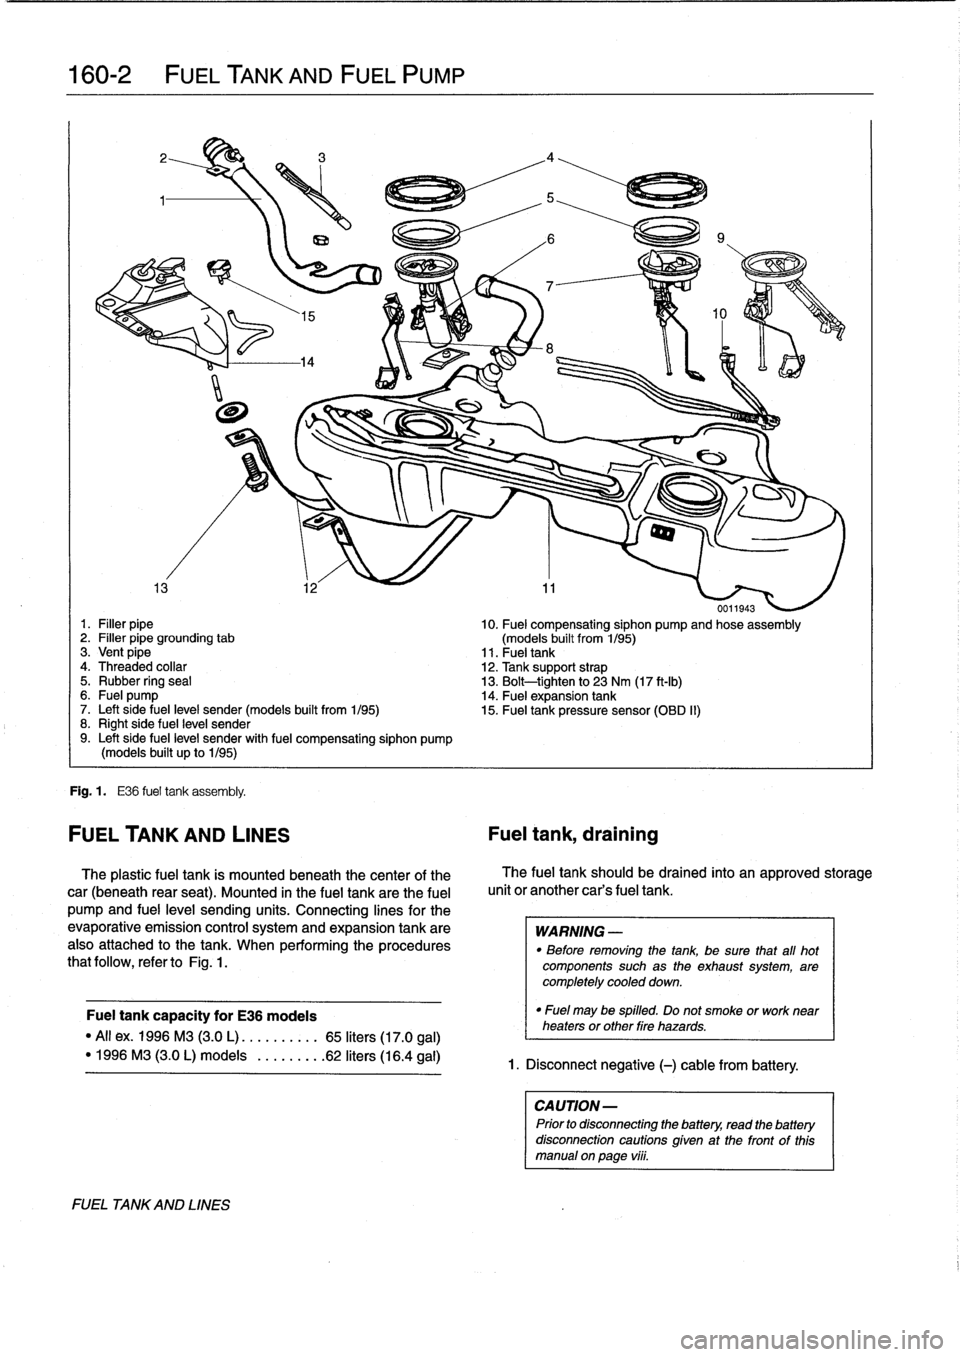 BMW 318i 1996 E36 Workshop Manual 
160-2

	

FUEL
TANK
AND
FUEL
PUMP

0011943
1
.
Filler
pipe

	

10
.
Fuel
compensating
siphon
pump
and
hose
assembly
2
.
Filler
pipe
grounding
tab

	

(models
built
from
1/95)
3
.
Vent
pipe

	

11
.
F